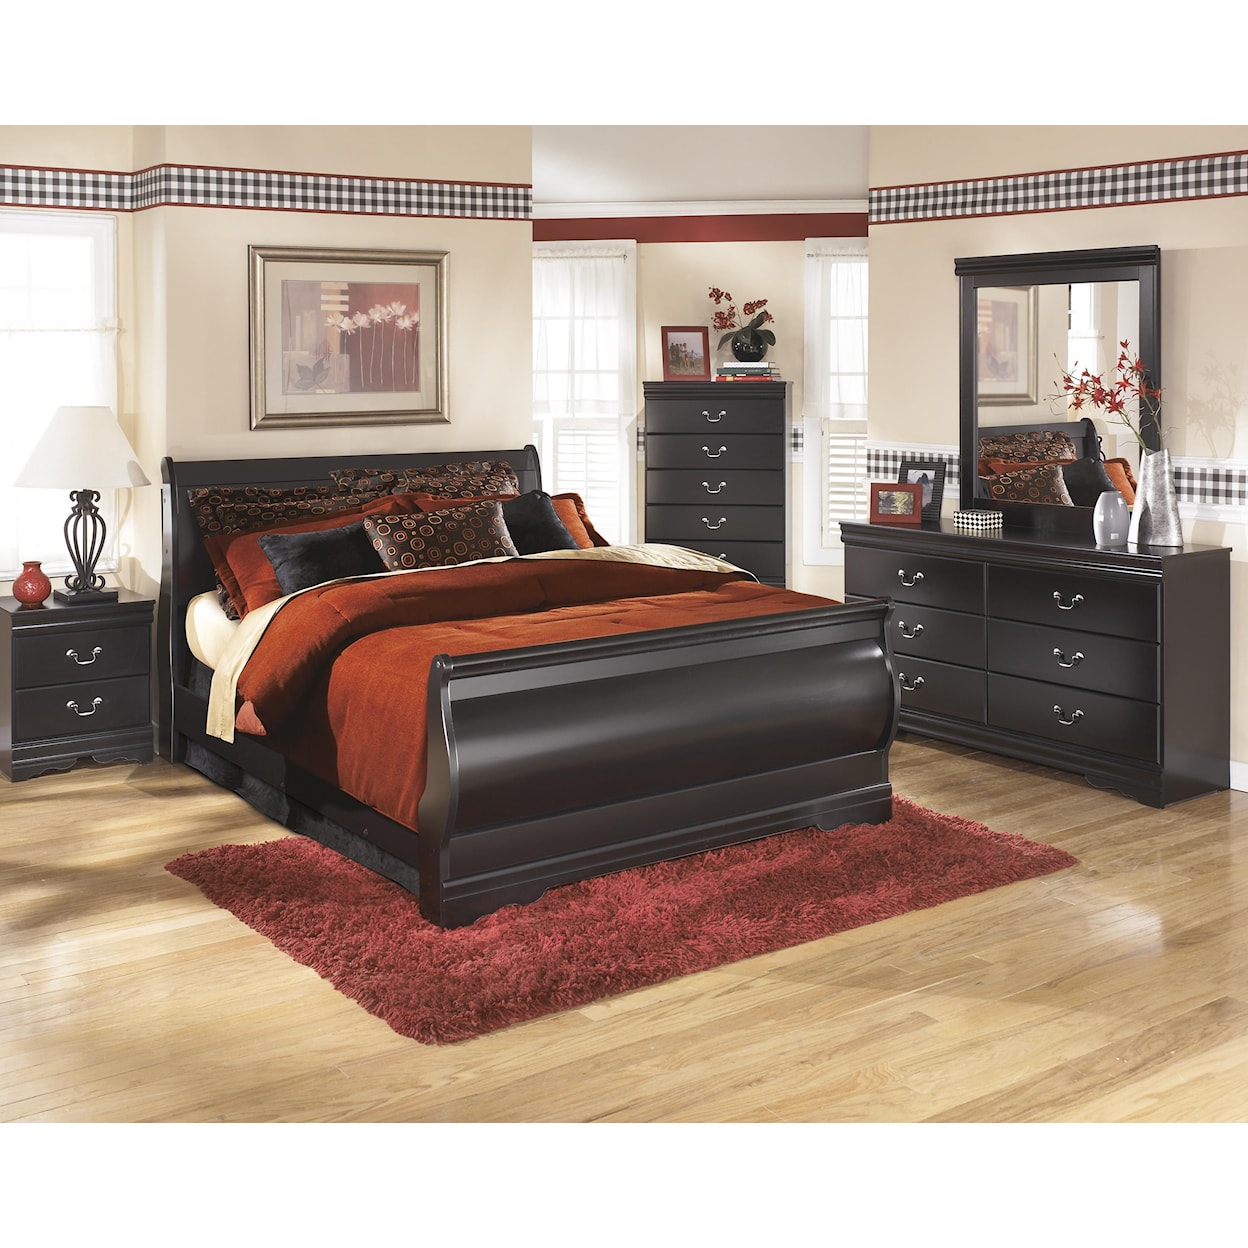 Signature Design by Ashley Furniture Huey Vineyard Queen Bedroom Group